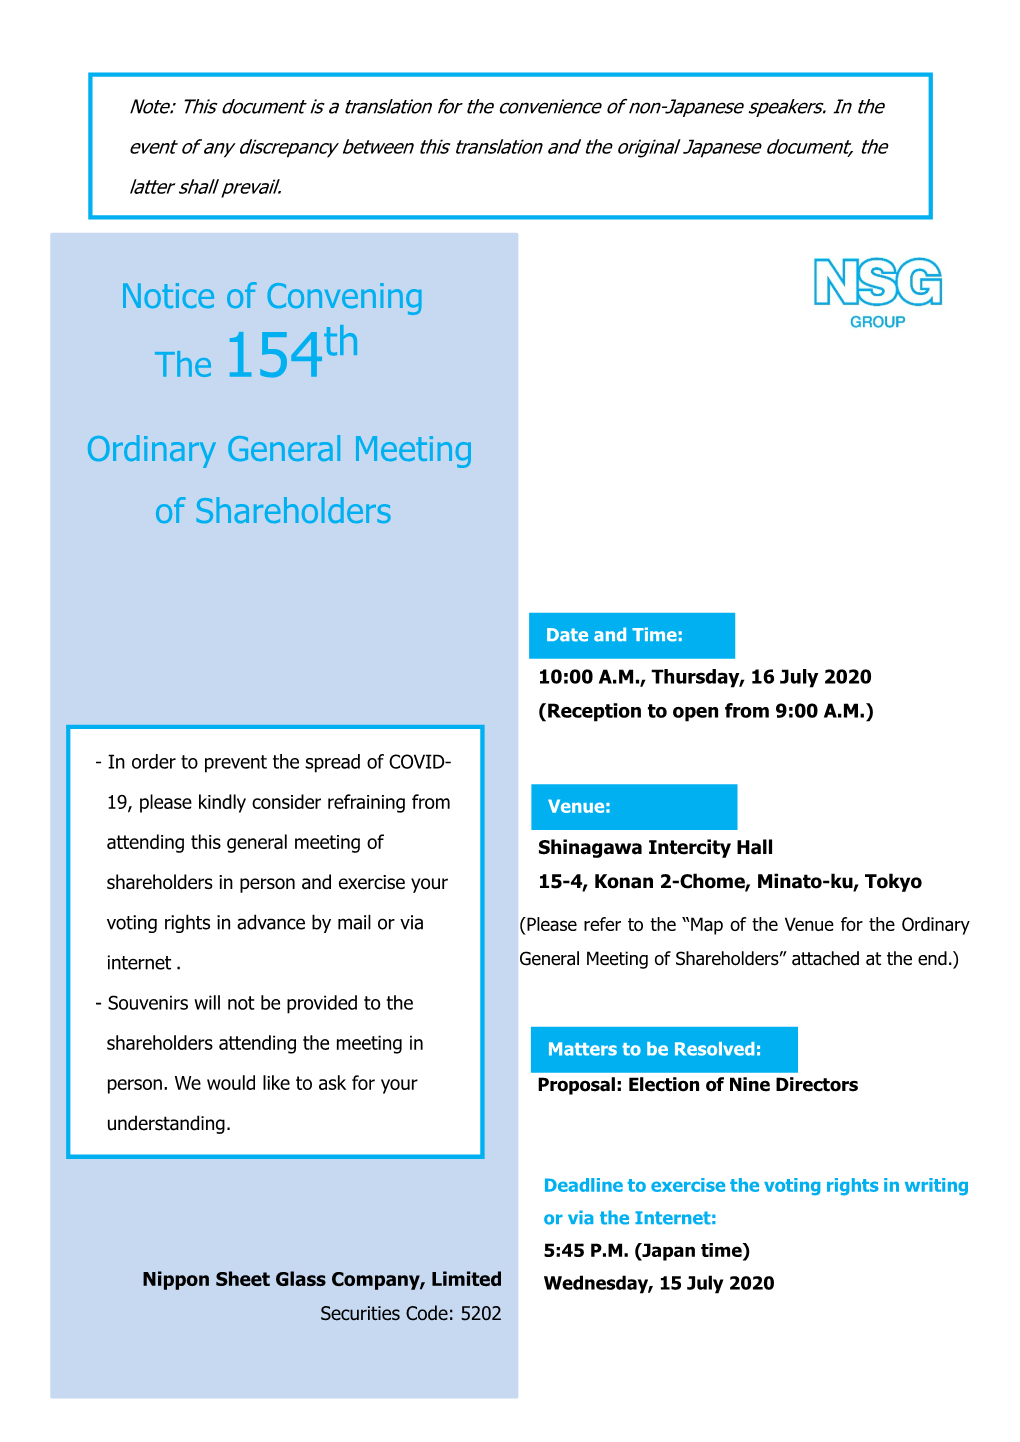 Notice of Convening the 154Th Ordinary General Meeting of Shareholders